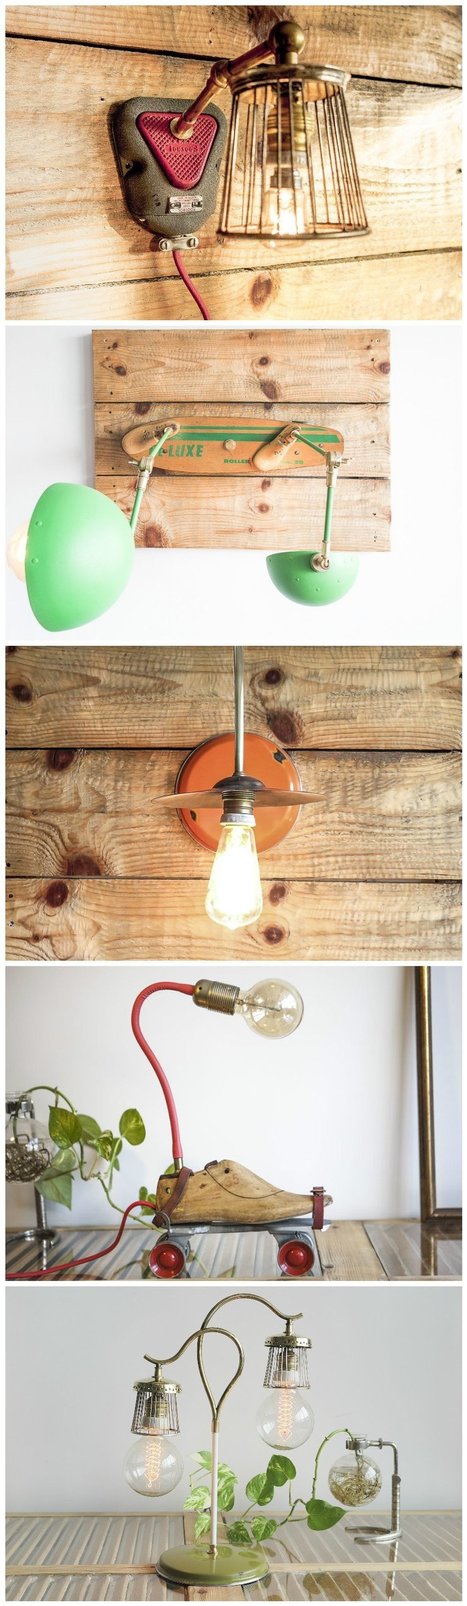 Upcycled Lamps by Studio Oryx | 1001 Recycling Ideas ! | Scoop.it